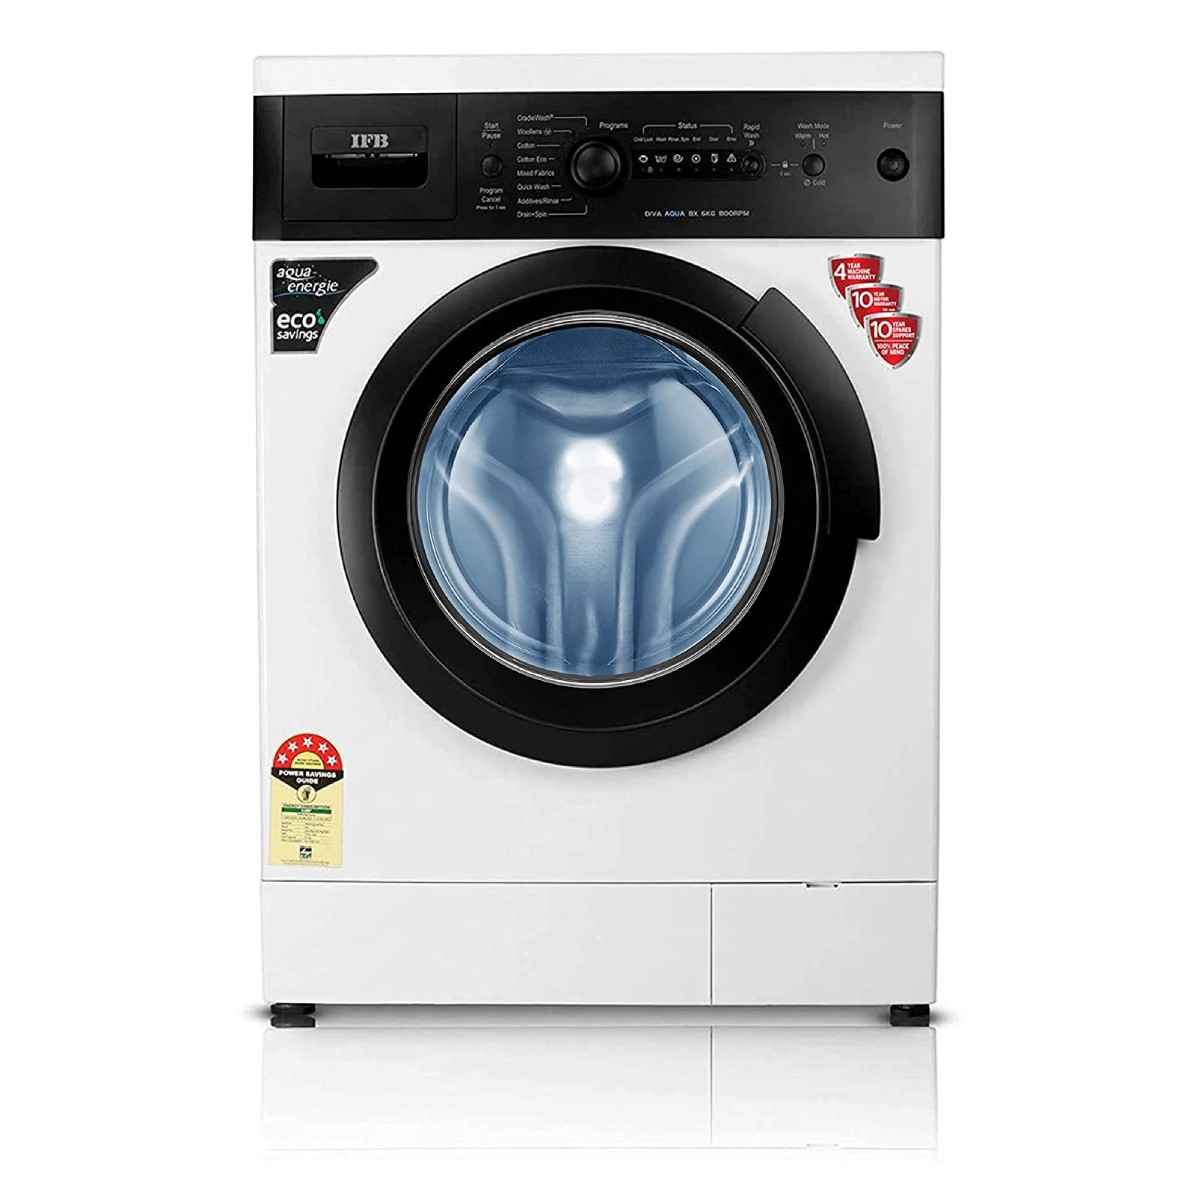 IFB 6 kg Fully Automatic Front Load washing machine (Diva Plus BX)